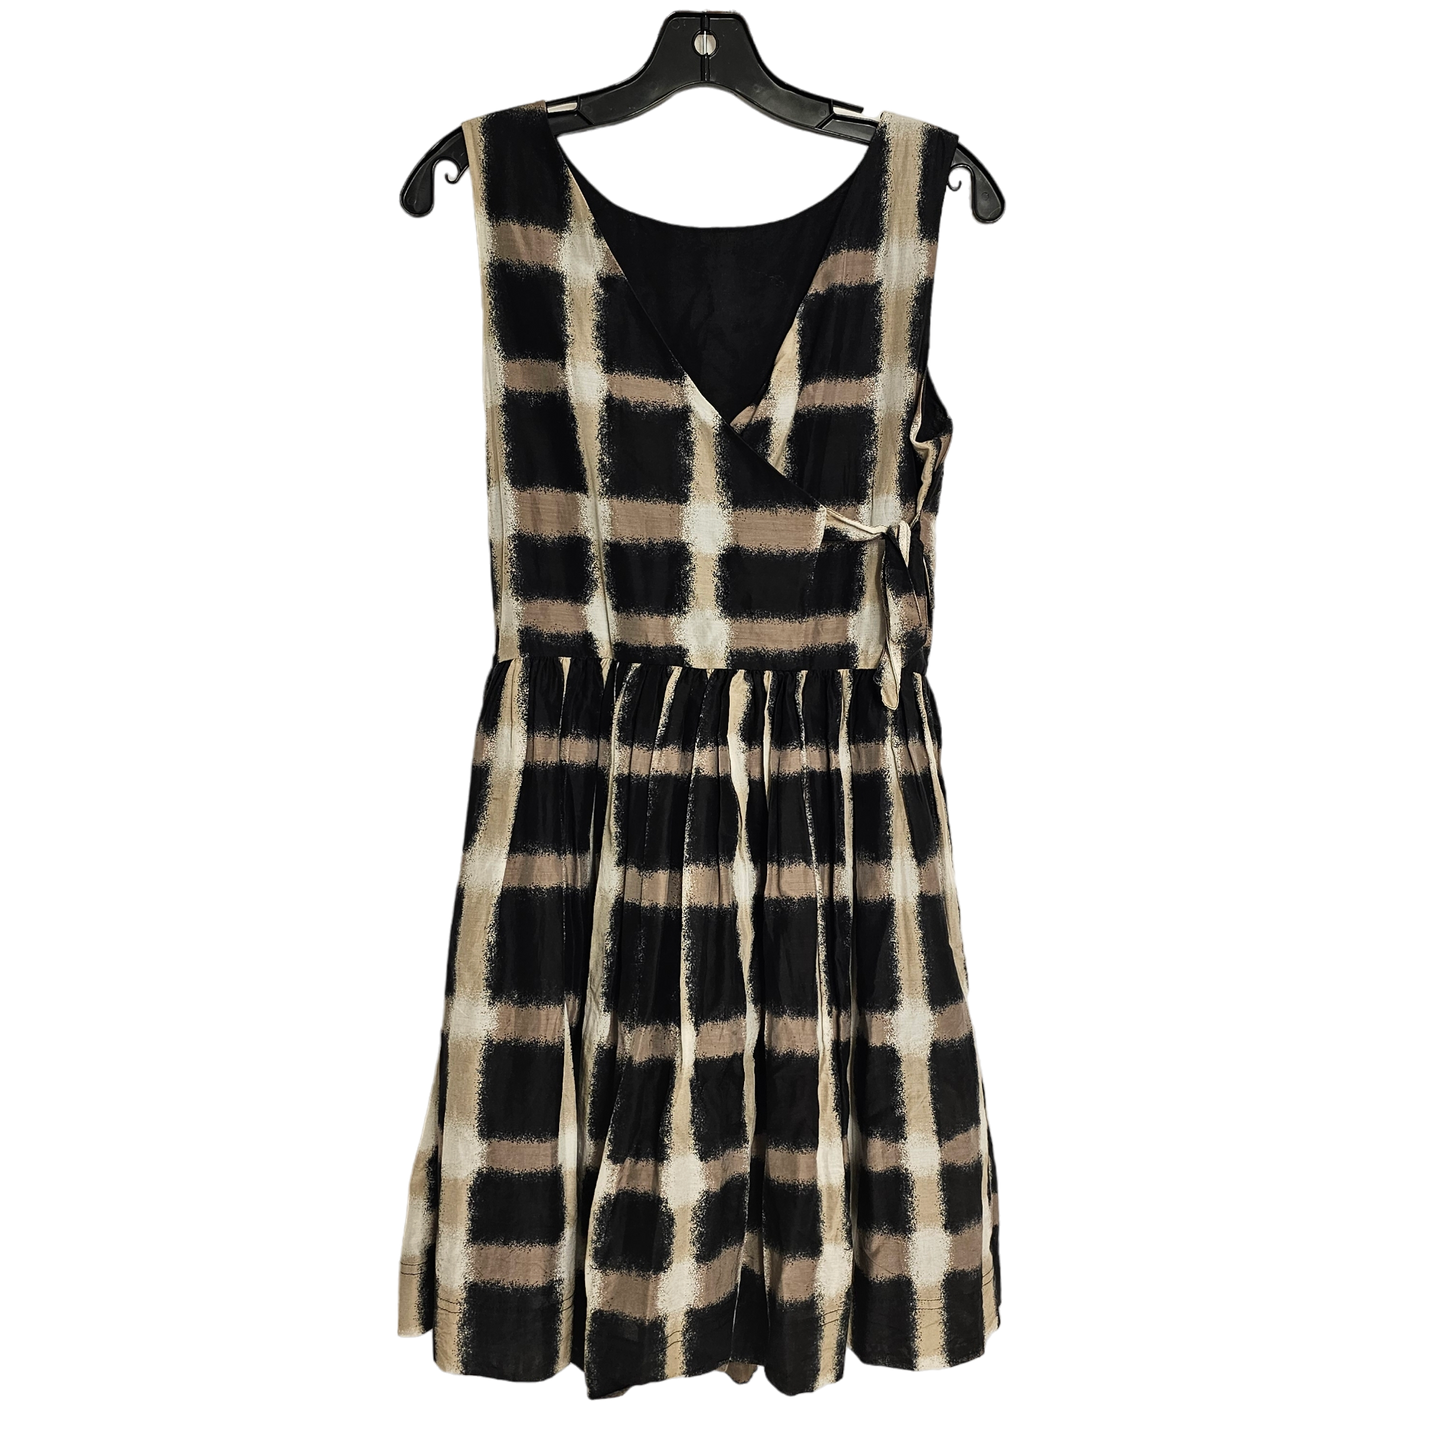 Dress Designer By Marc By Marc Jacobs  Size: 2